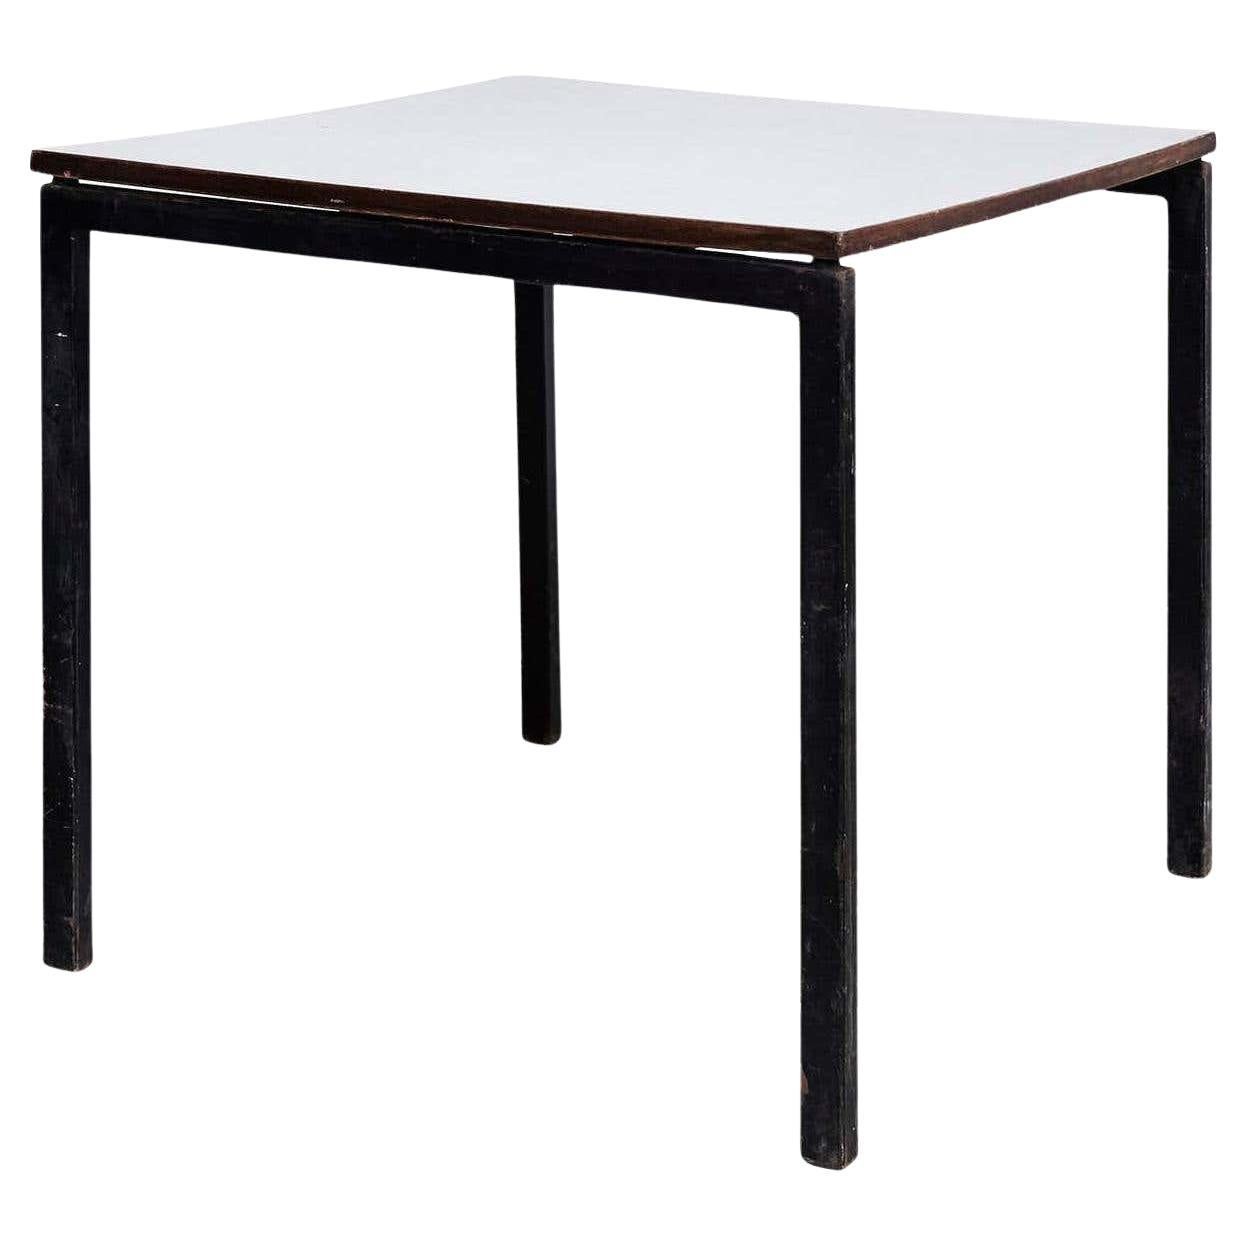 Charlotte Perriand, Mid-Century Modern, Wood Formica and Metal Table, circa 1950 For Sale